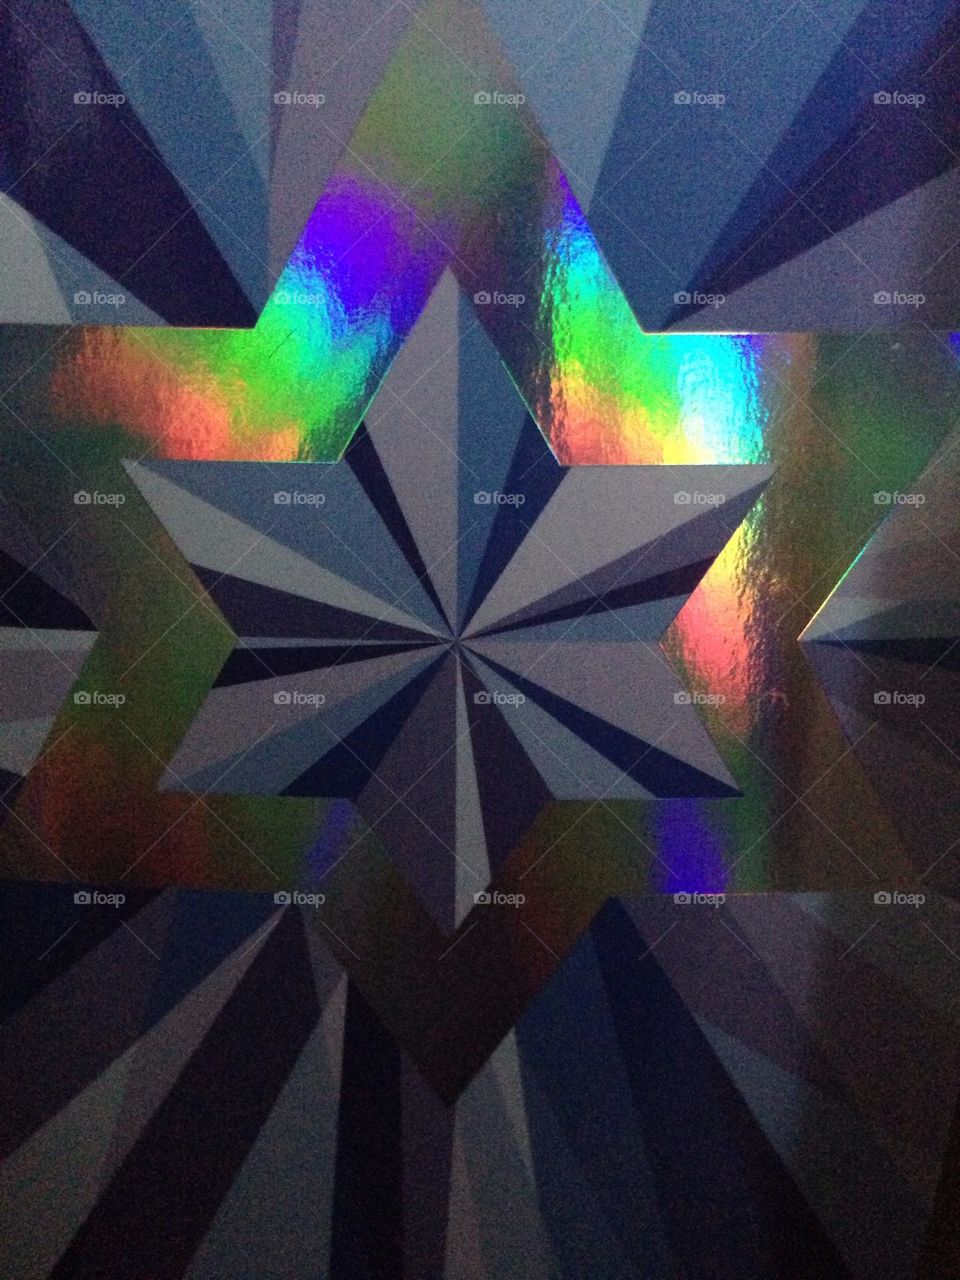  Foil Ornament with light reflecting off of it to form the spectrum of prismatic colors like a rainbow.